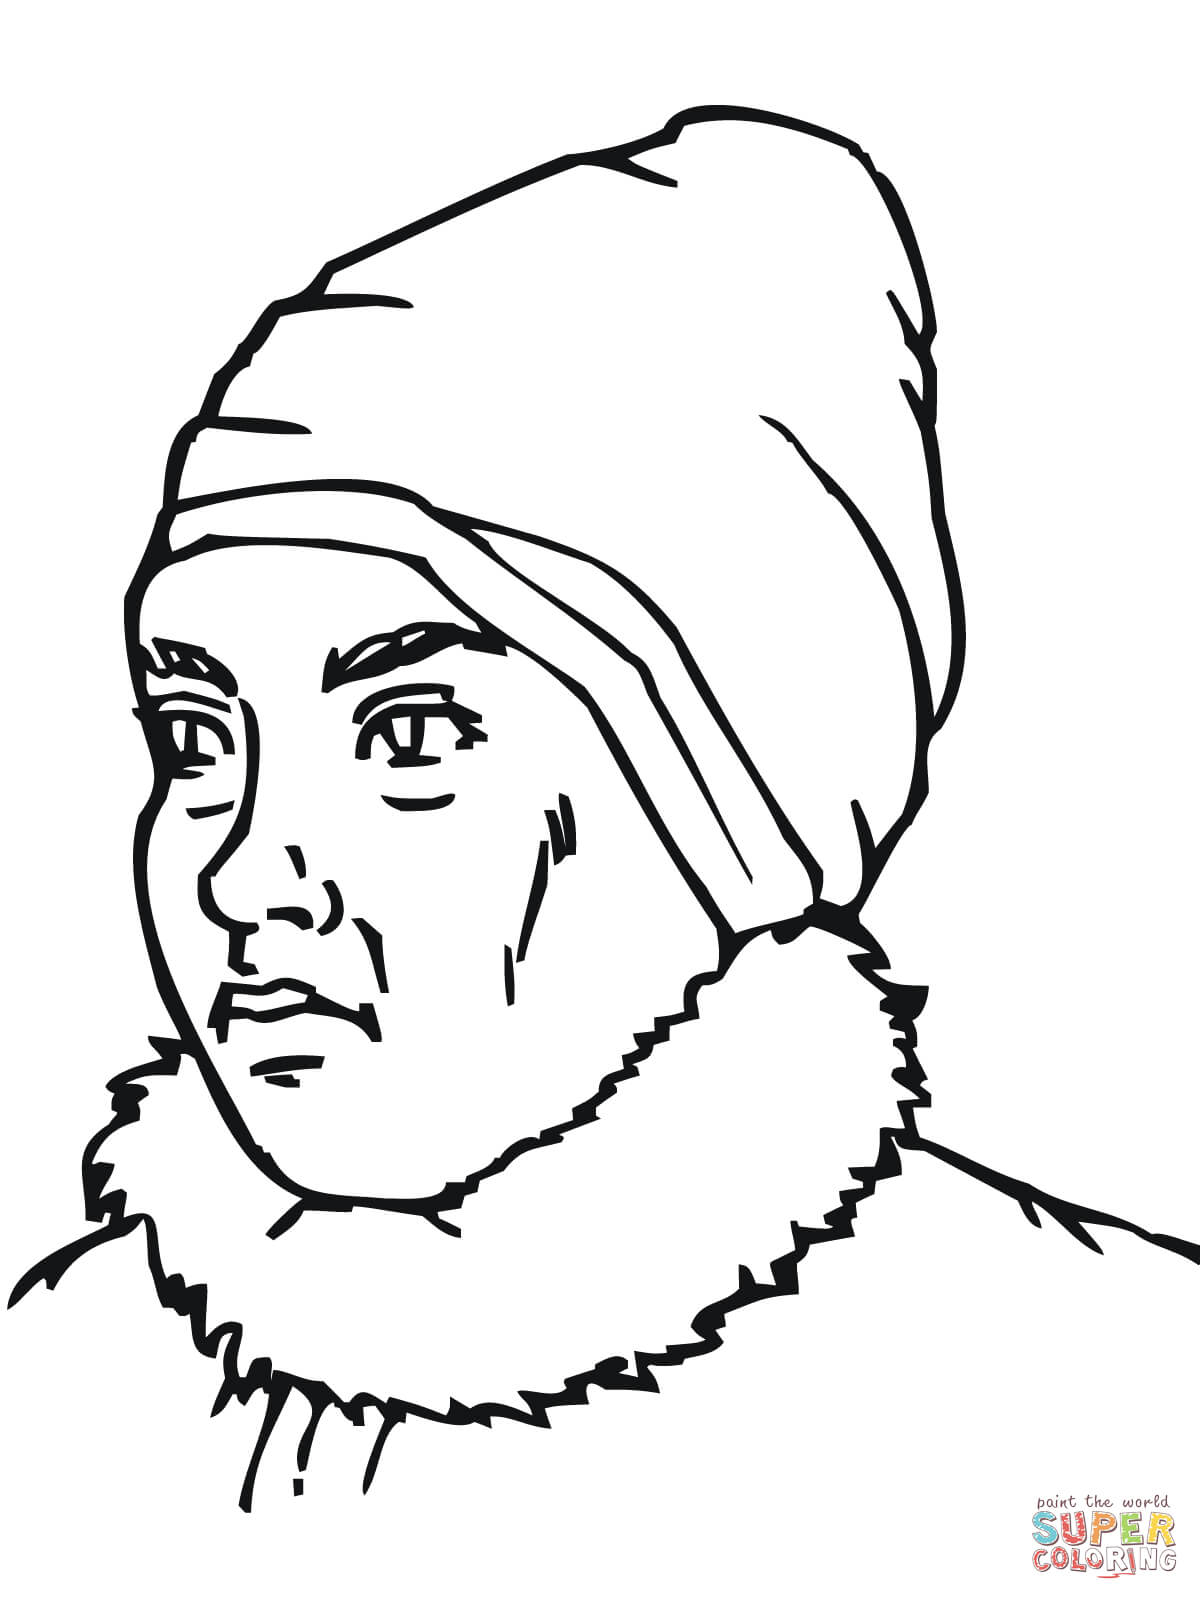 Inuit Coloring Pages Inuit Woman Portrait Coloring Page Free Printable Coloring Pages